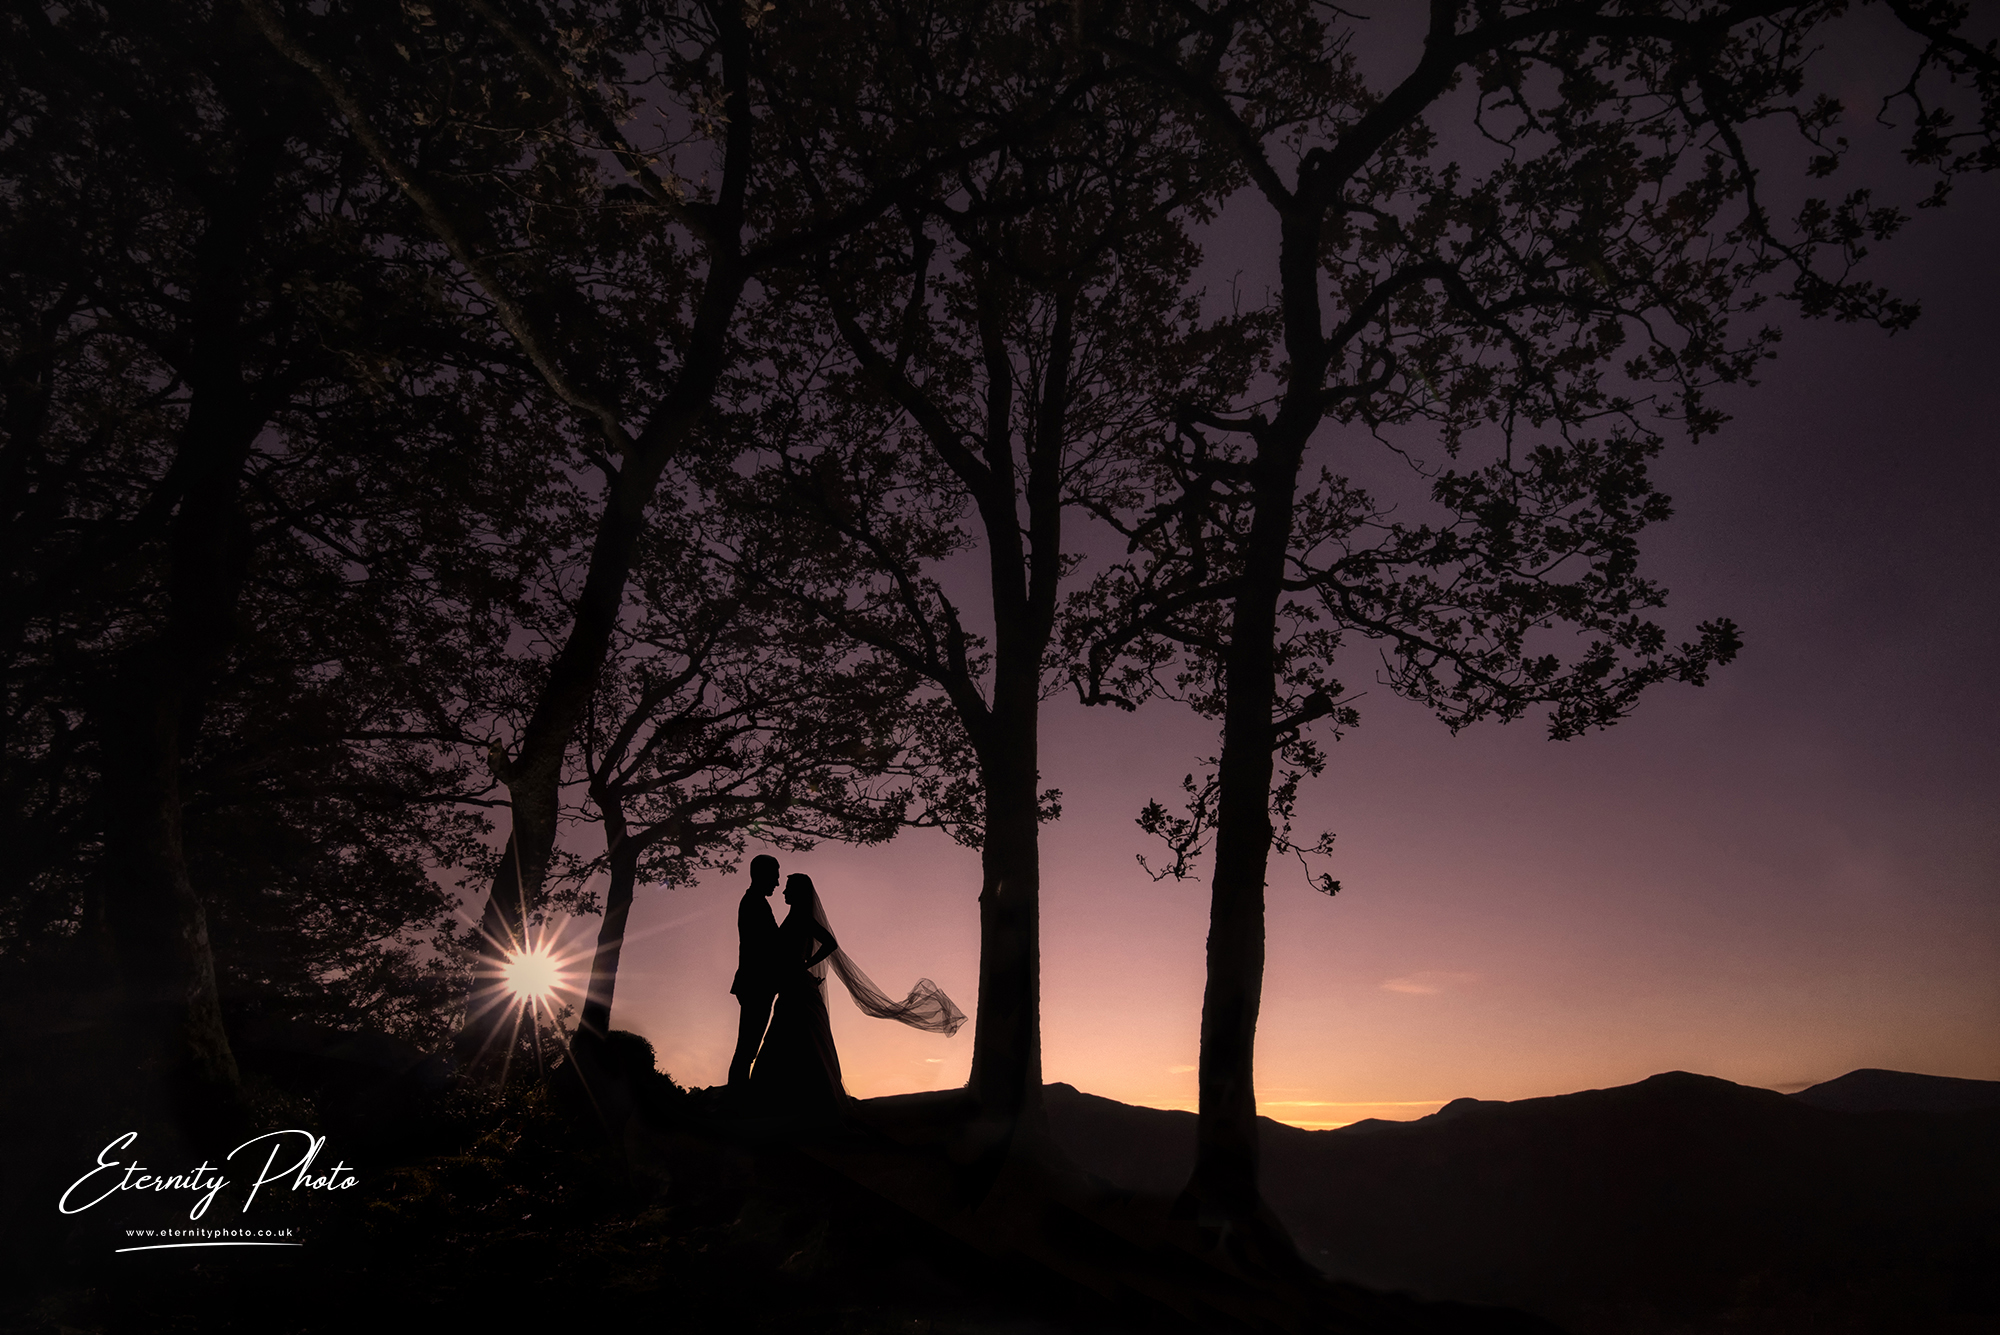 Couple silhouette at sunset with trees and hills.